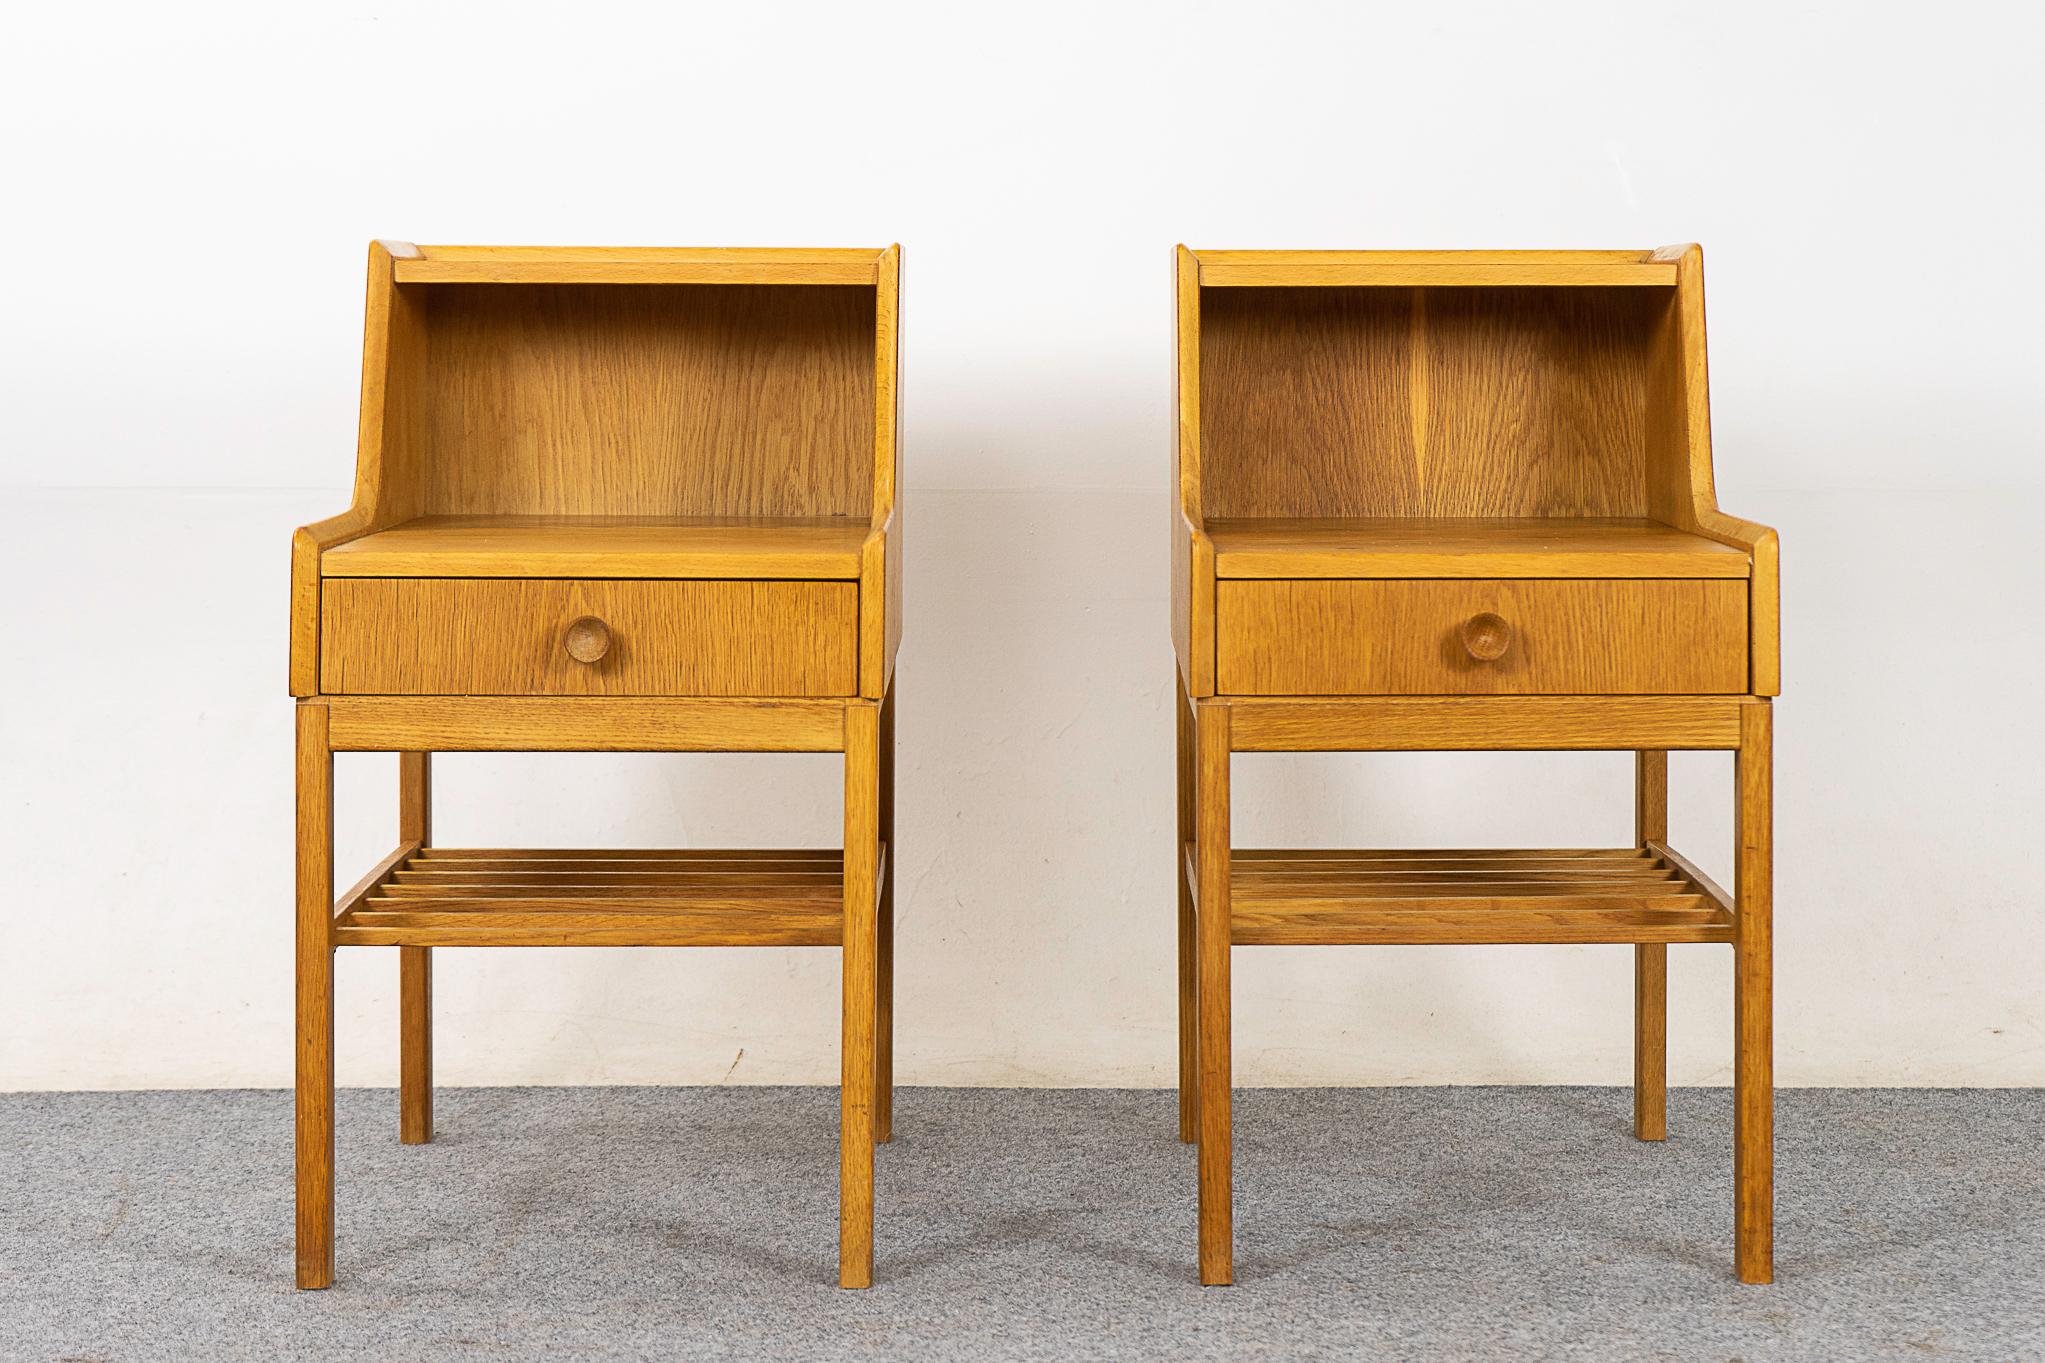 Set of 2 Oak bedside tables, circa 1960's. Dovetailed drawer for small items, lower shelf is perfect for your favorite book!